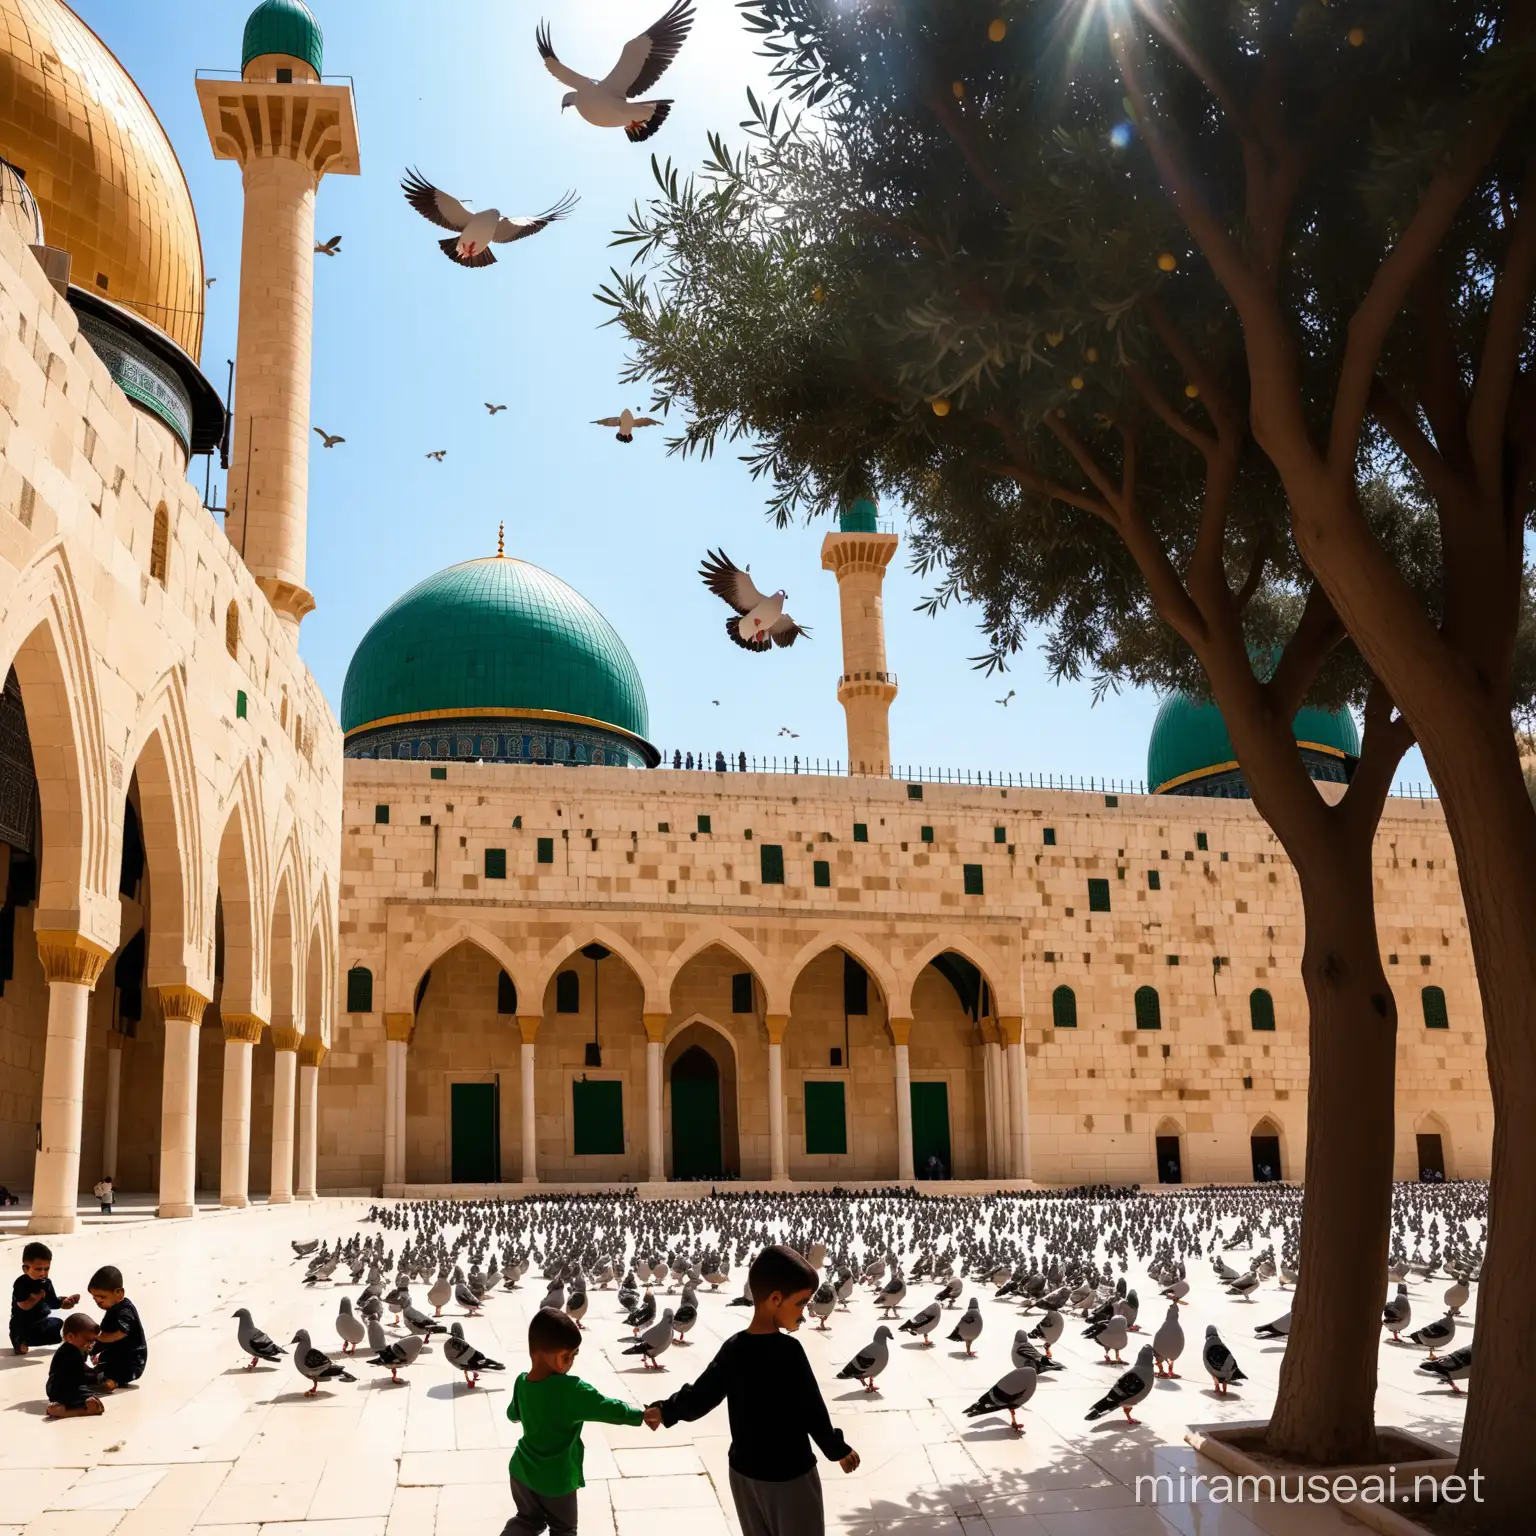 Children of Gaza Playing in AlAqsa Mosque Amidst Heavenly Atmosphere